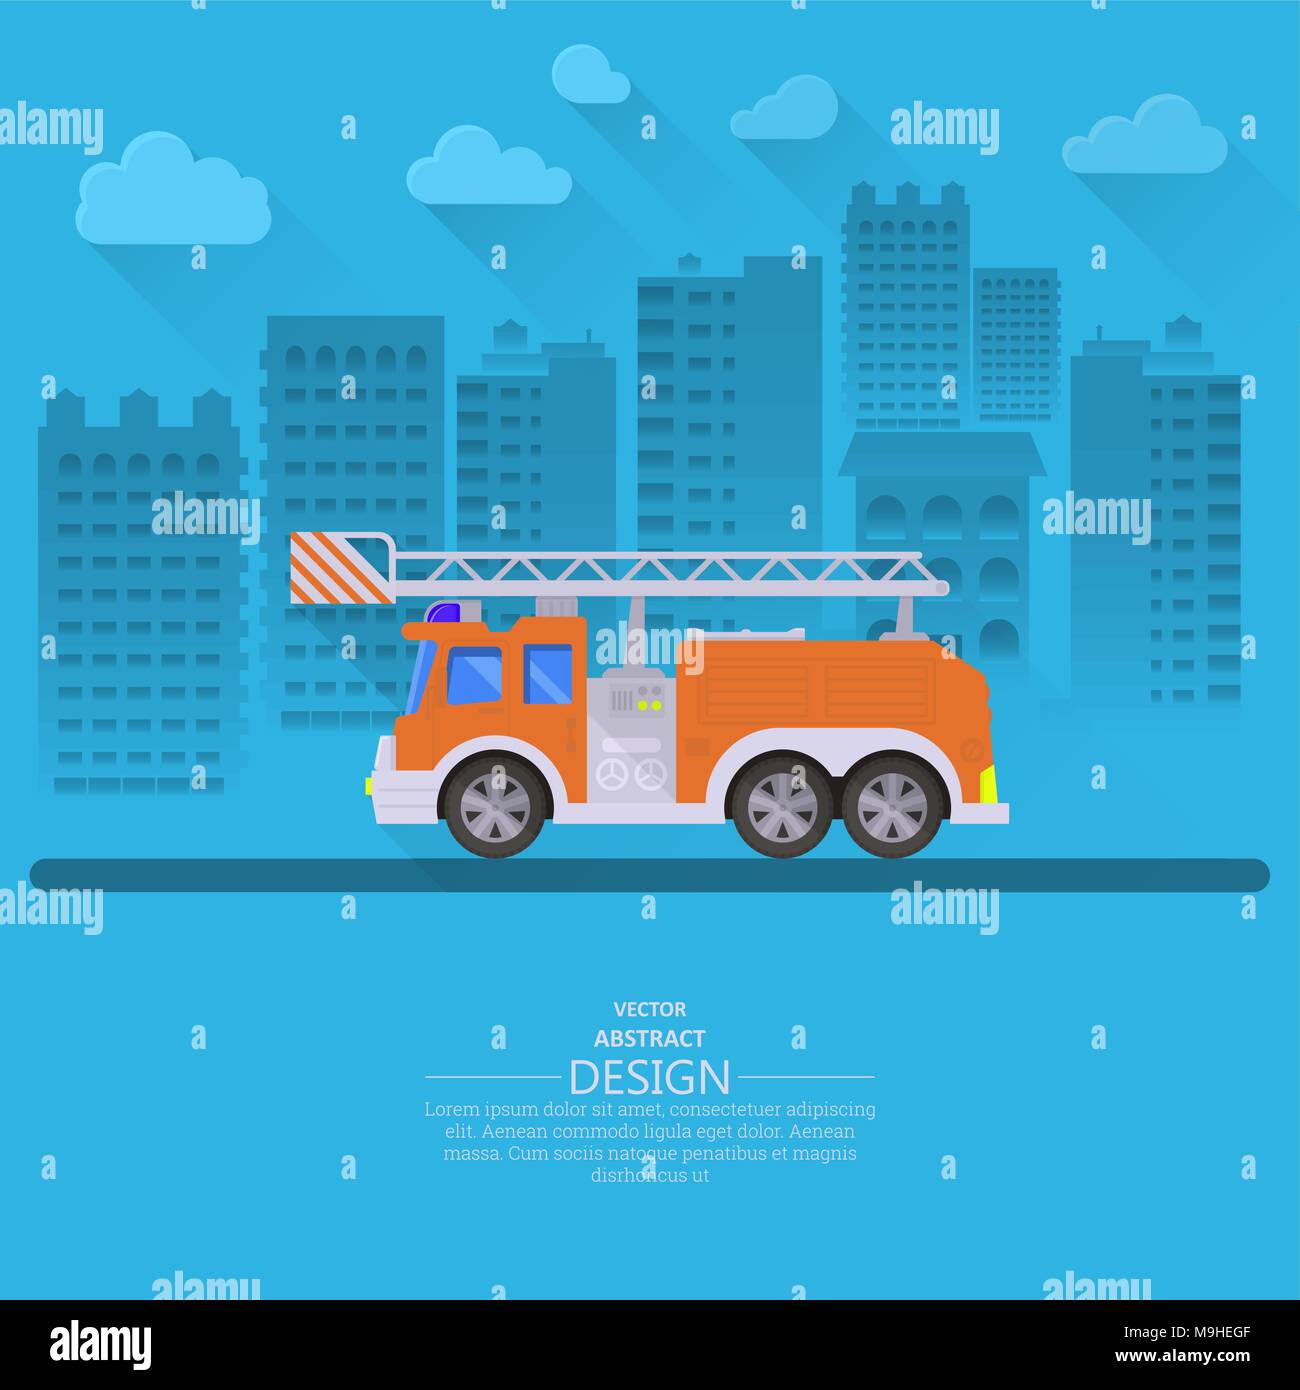 The fire truck going on the way to a city background. Concept of fire safety. Service 911. Help in emergency situations. A vector illustration in flat Stock Vector